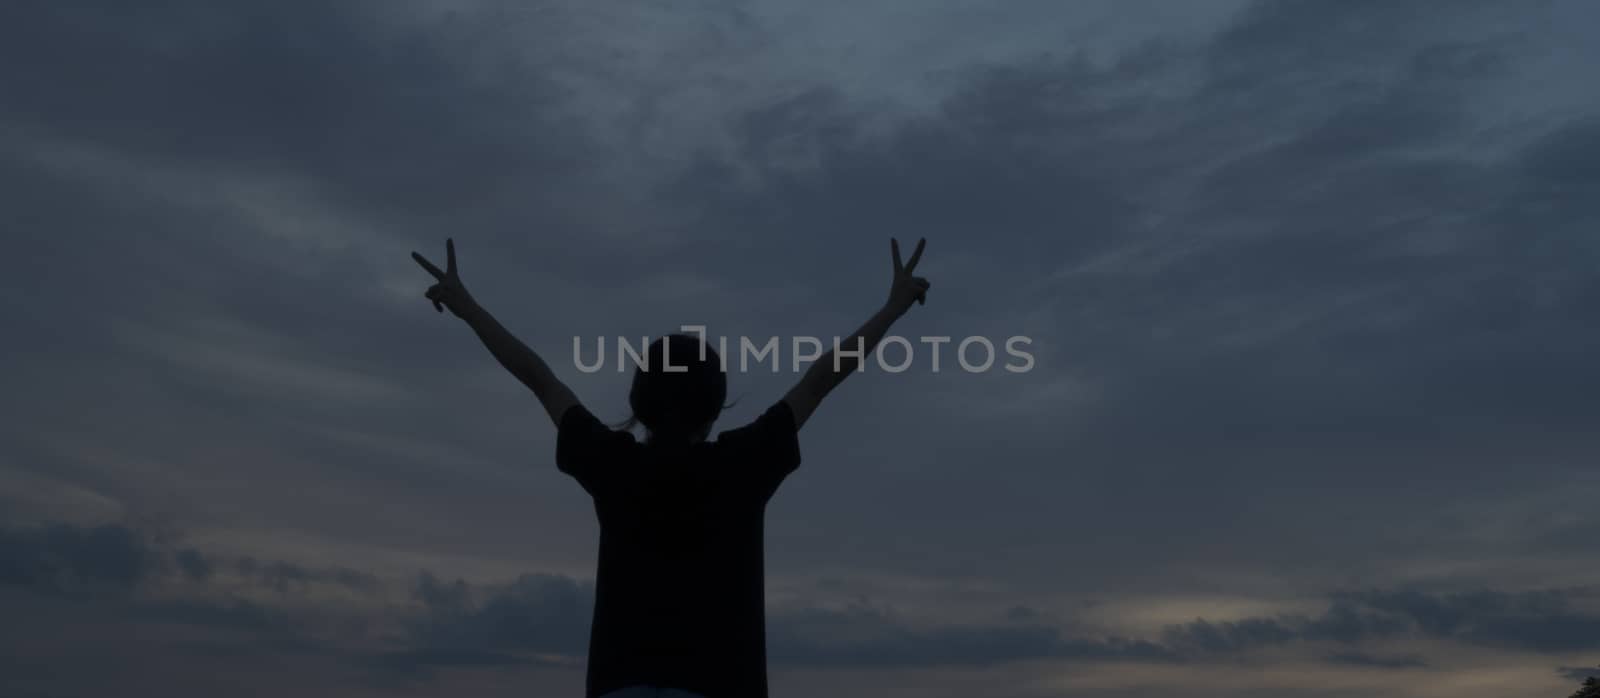 The silhouette of a woman with open hands